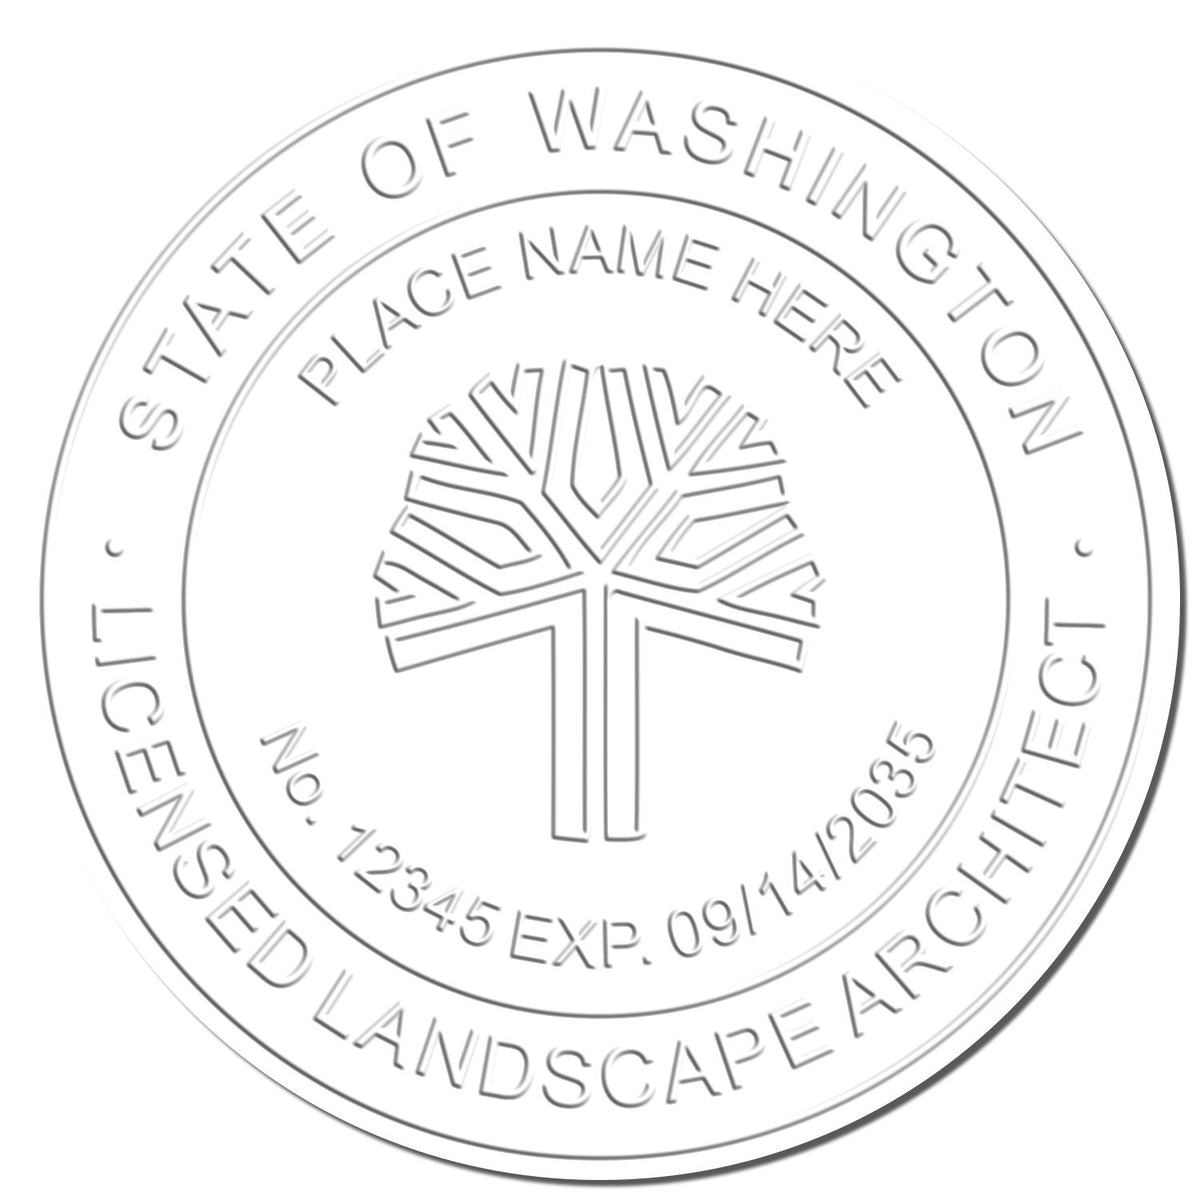 This paper is stamped with a sample imprint of the Soft Pocket Washington Landscape Architect Embosser, signifying its quality and reliability.